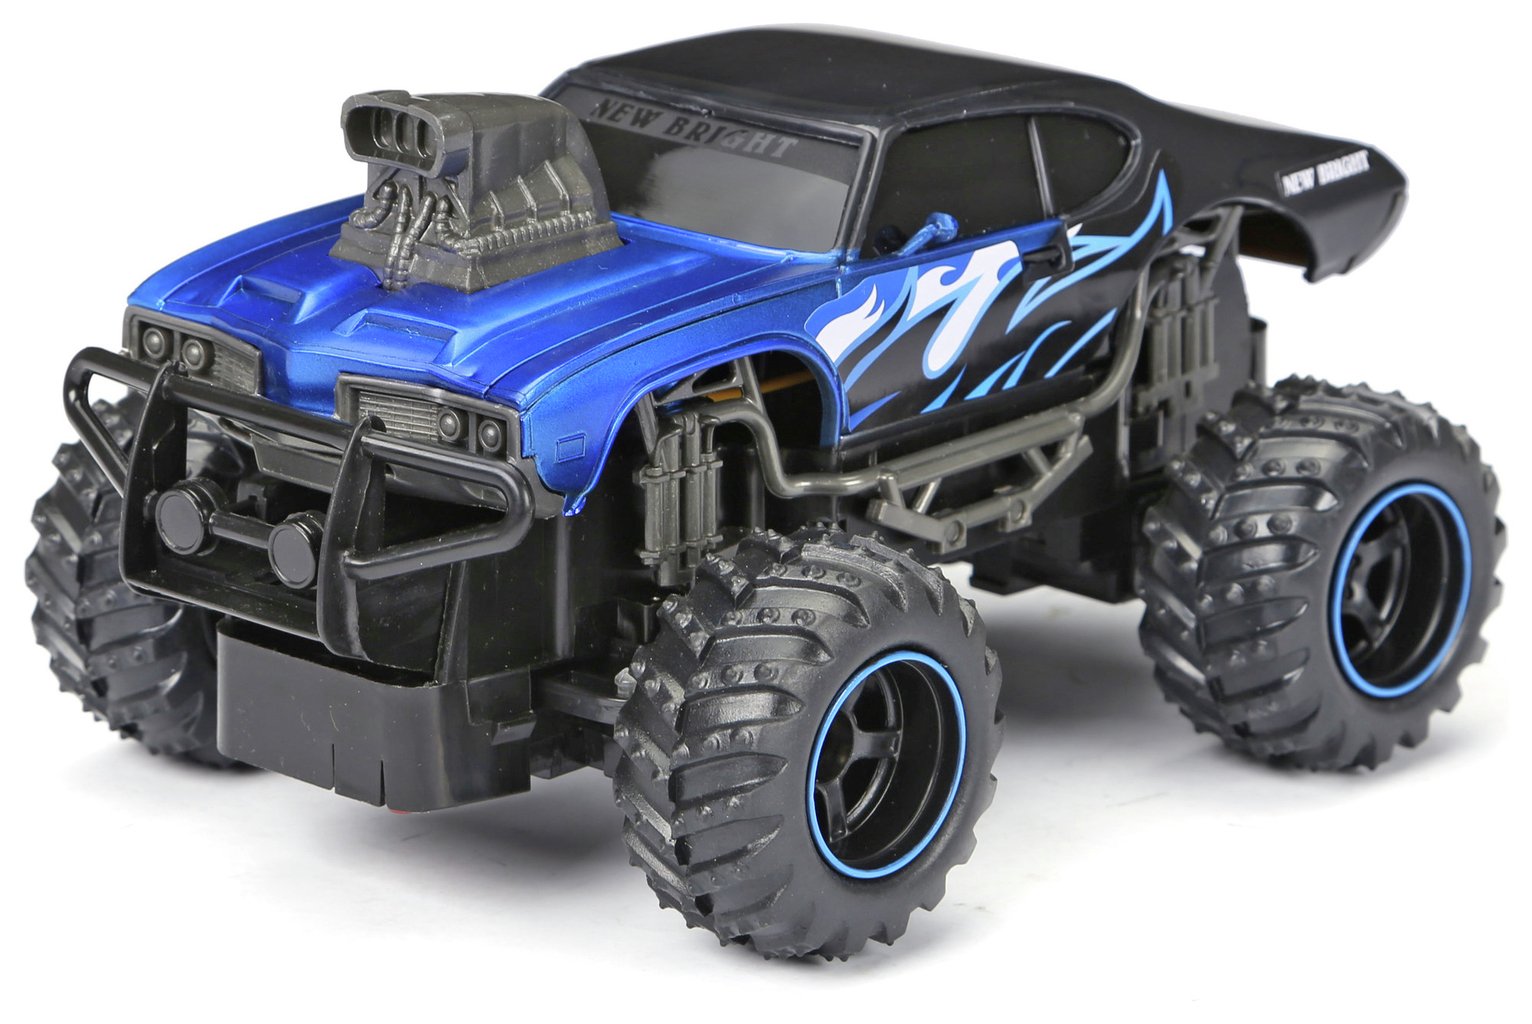 New Bright 1:24 Radio Controlled Mega Muscle Truck - Blue